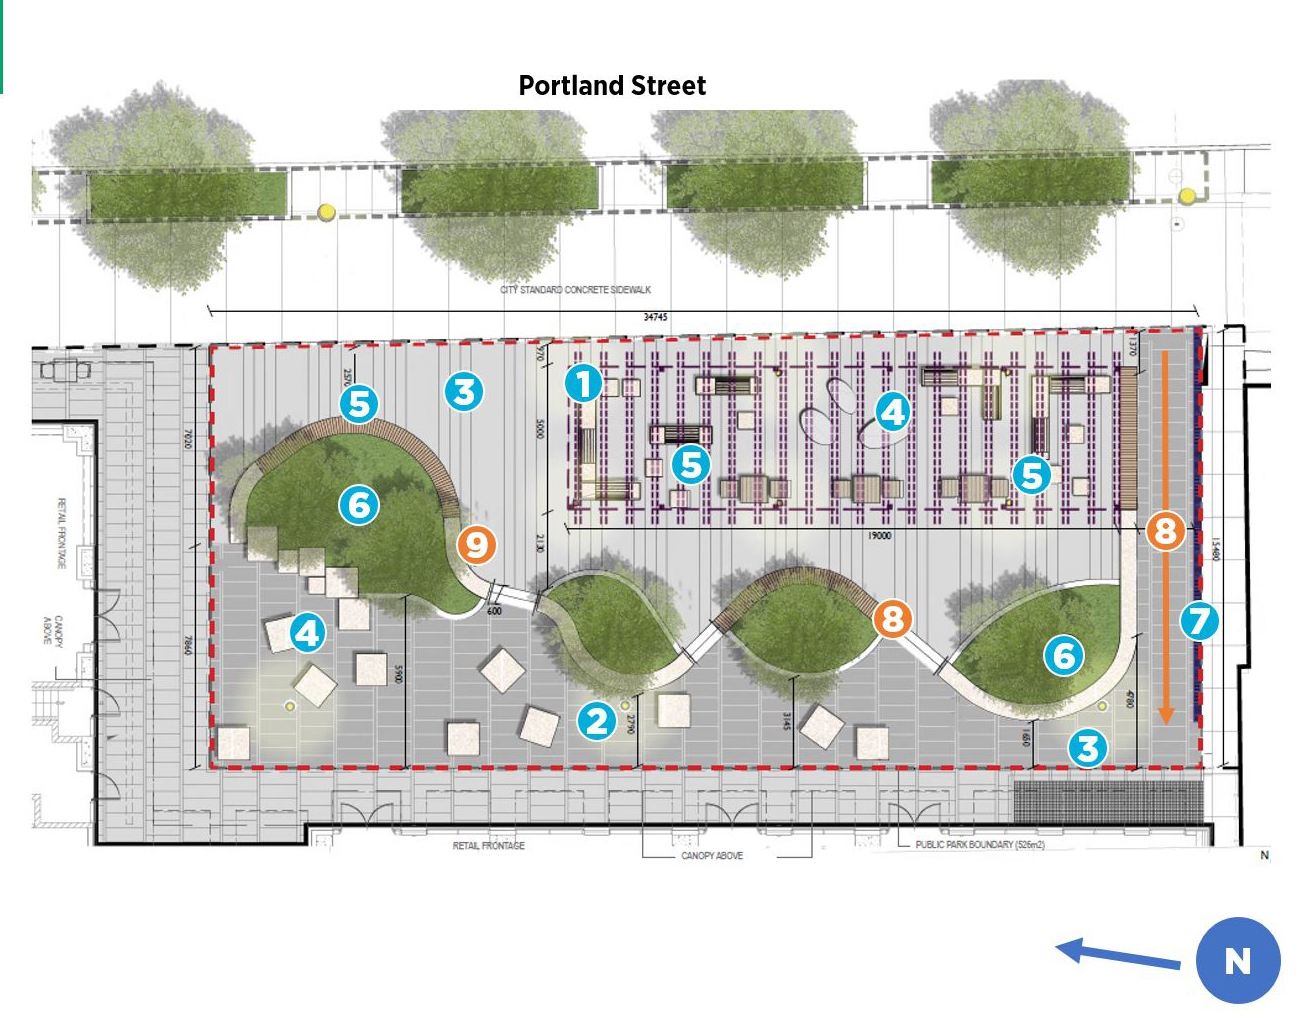 This image shows the proposed concept design for the new park on Portland Street, which will include a large shade structure, informal and formal seating opportunities, new planting areas, and more. A full description list is below.